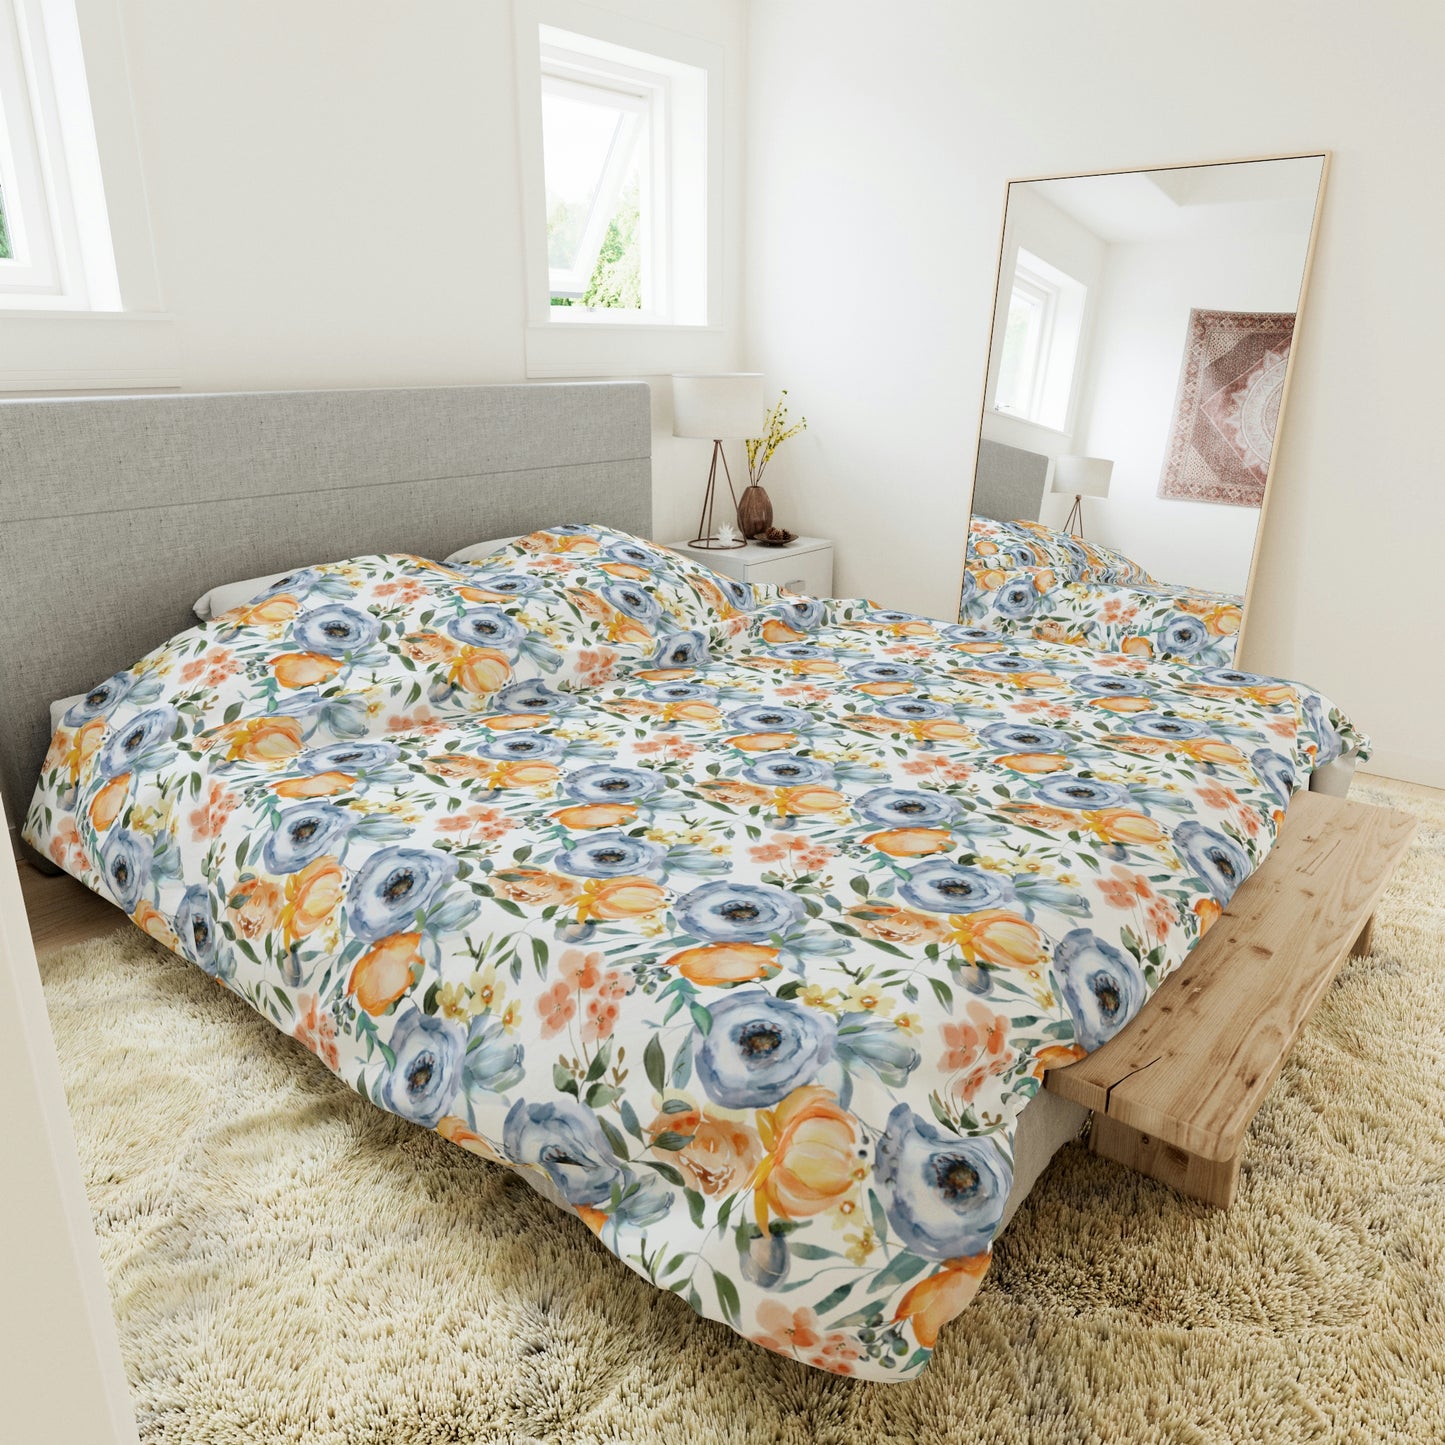 Mellow Apricot Pastel Blue Floral Pattern Duvet Cover lying on a bed, microfiber duvet cover bedroom accent